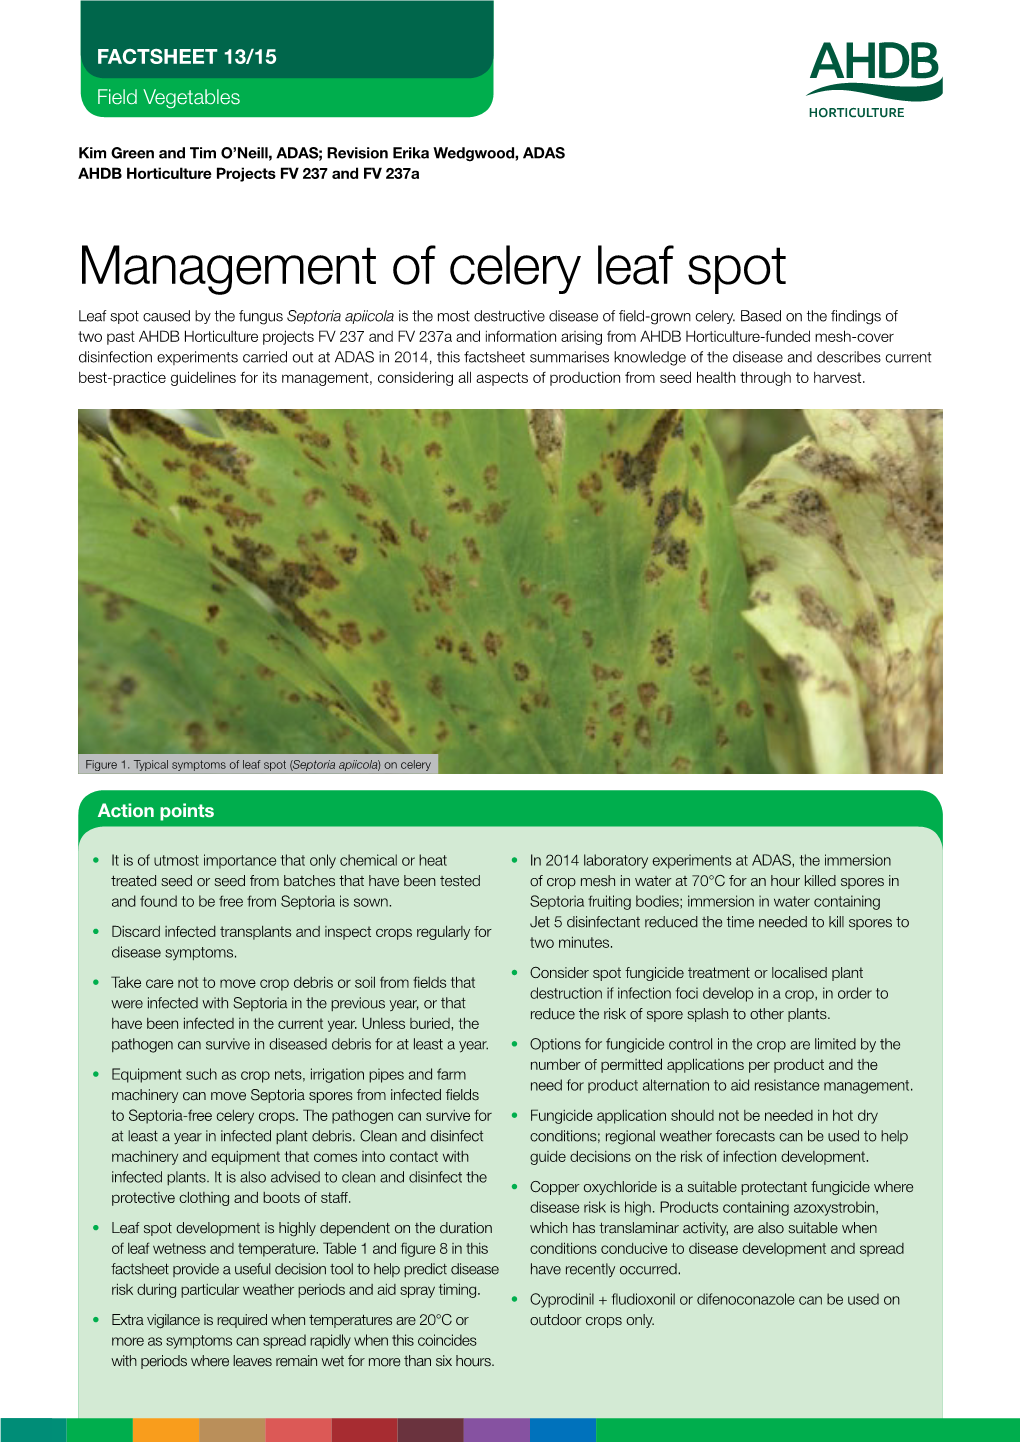 Management of Celery Leaf Spot Leaf Spot Caused by the Fungus Septoria Apiicola Is the Most Destructive Disease of Field-Grown Celery